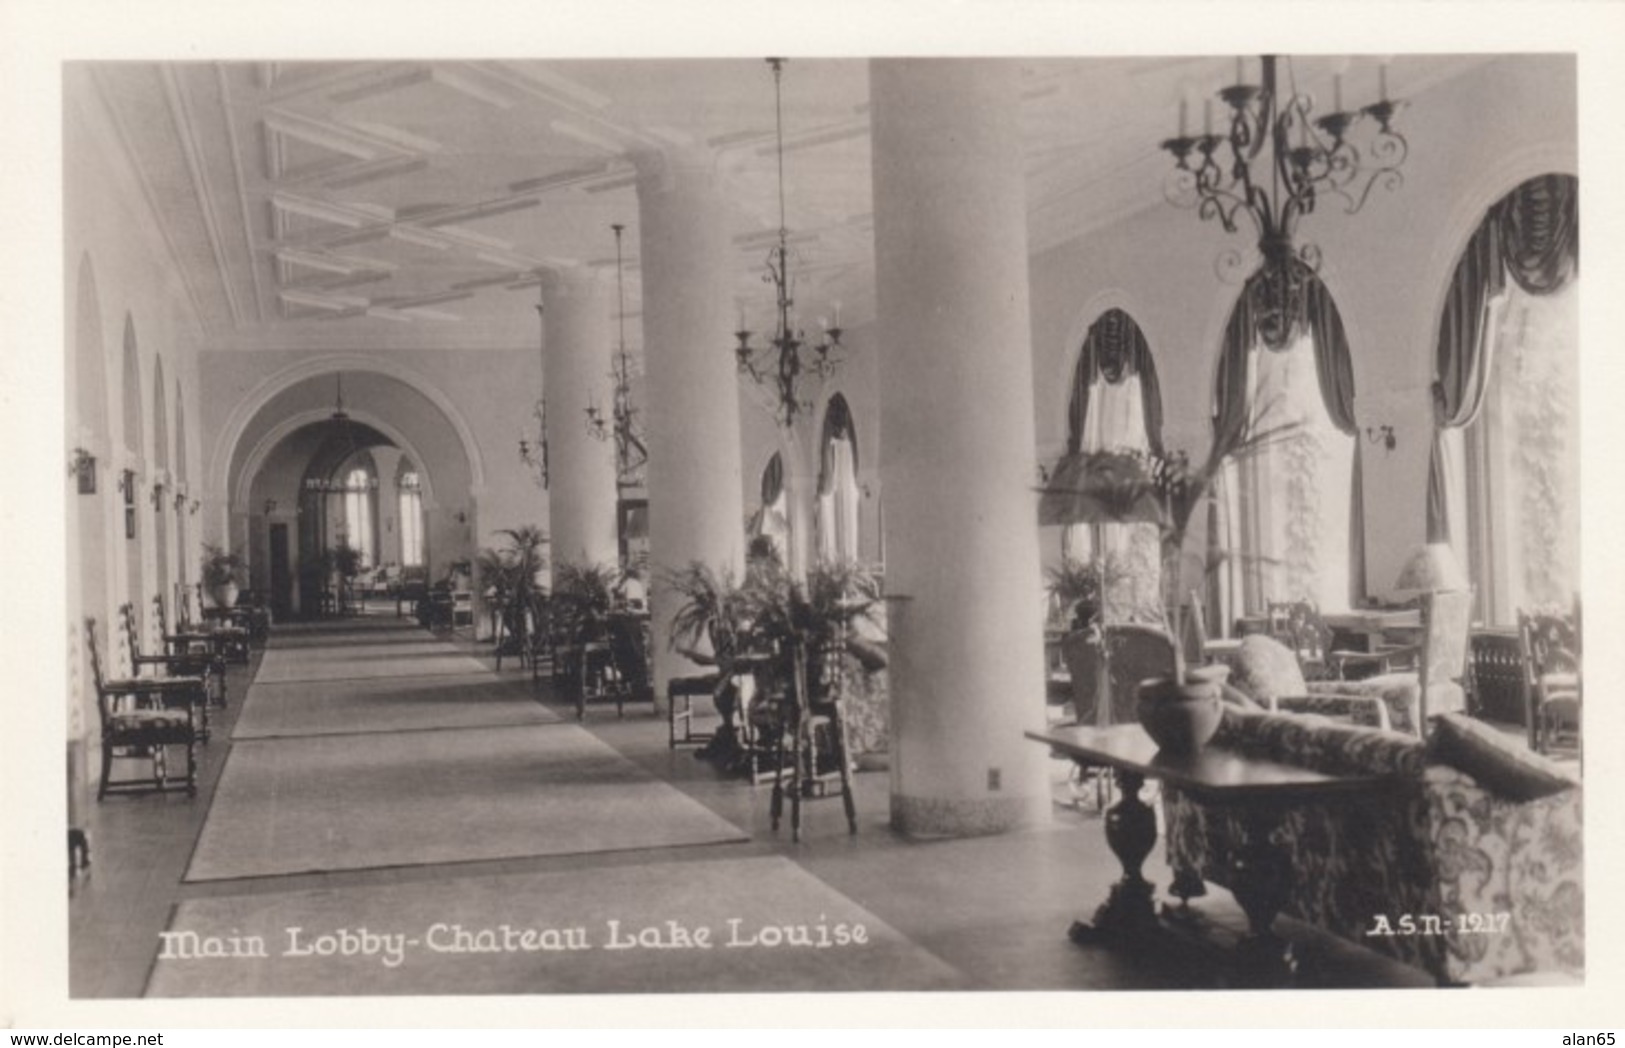 Chateau Lake Louise Alberta Canada, Main Lobby Interior View, C1940s/50s Vintage Real Photo Postcard - Lac Louise